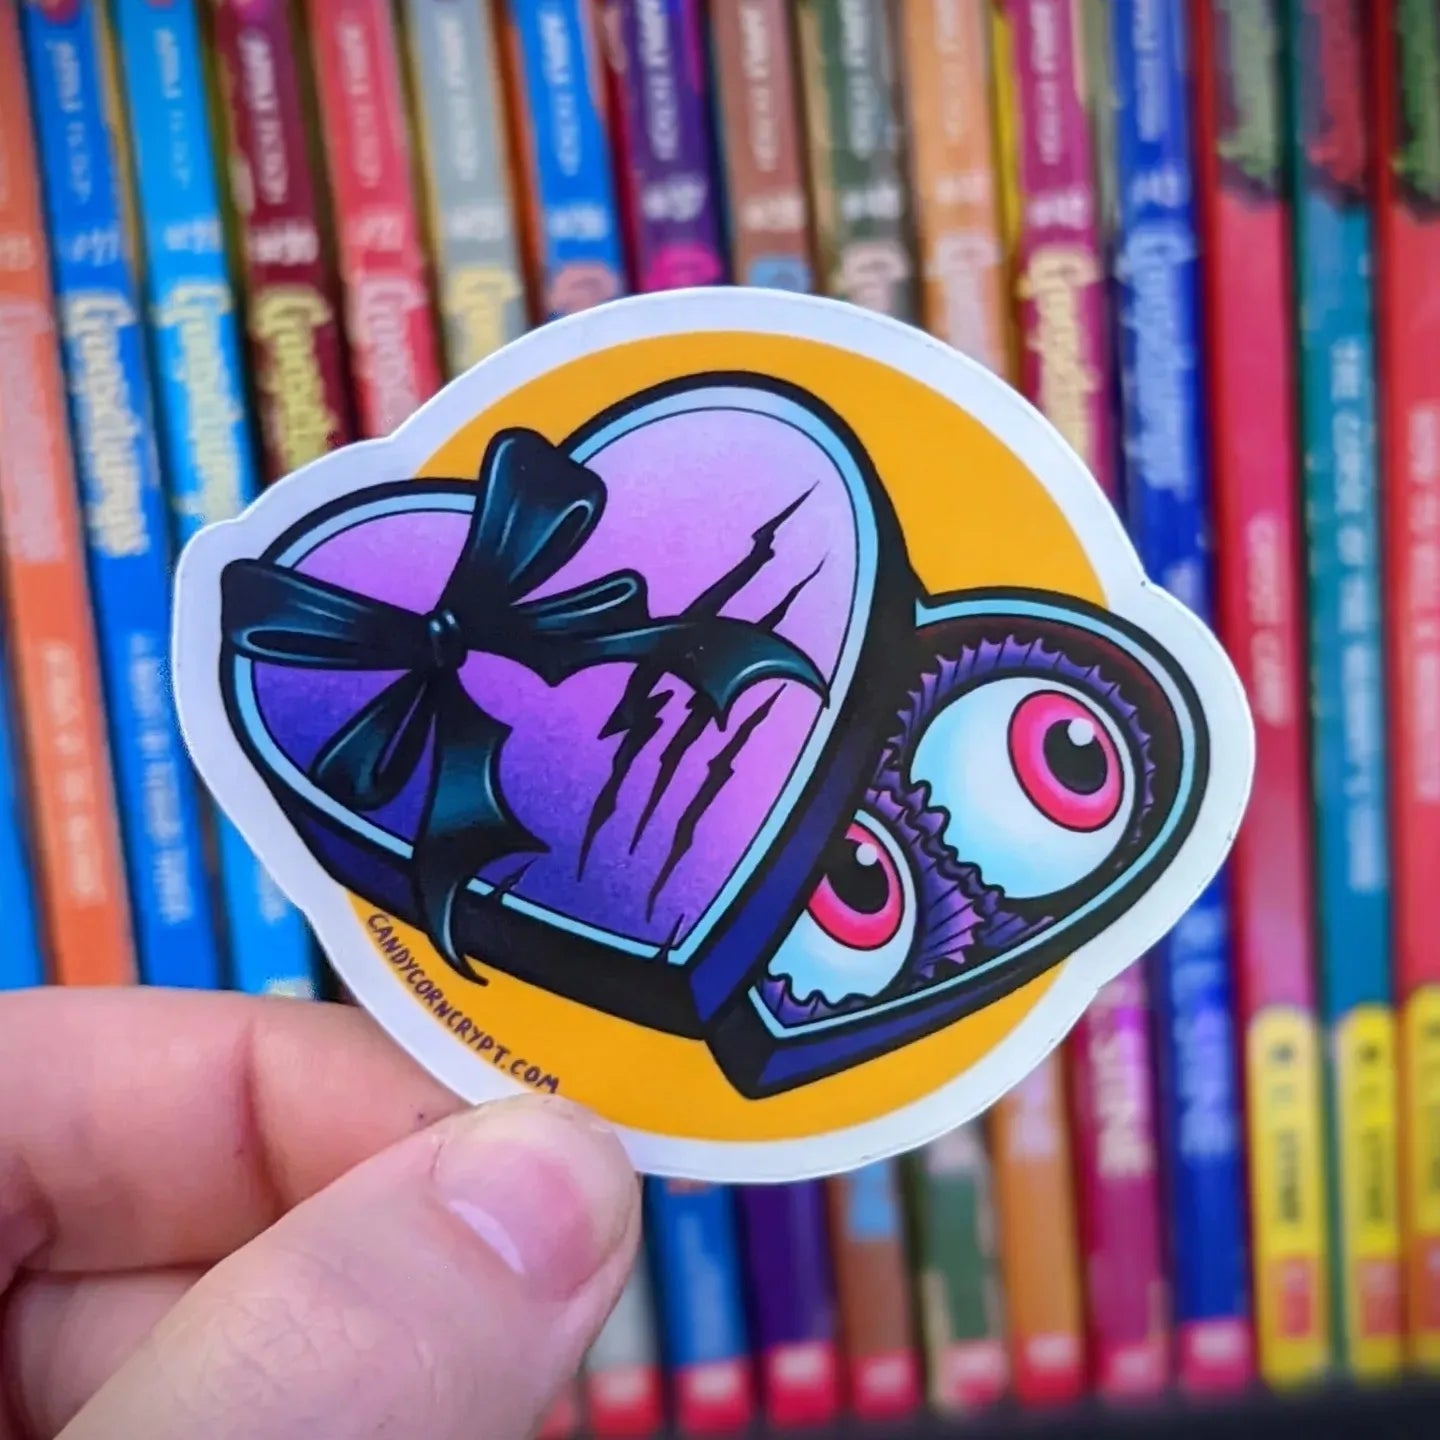 Sticker of the Month #4